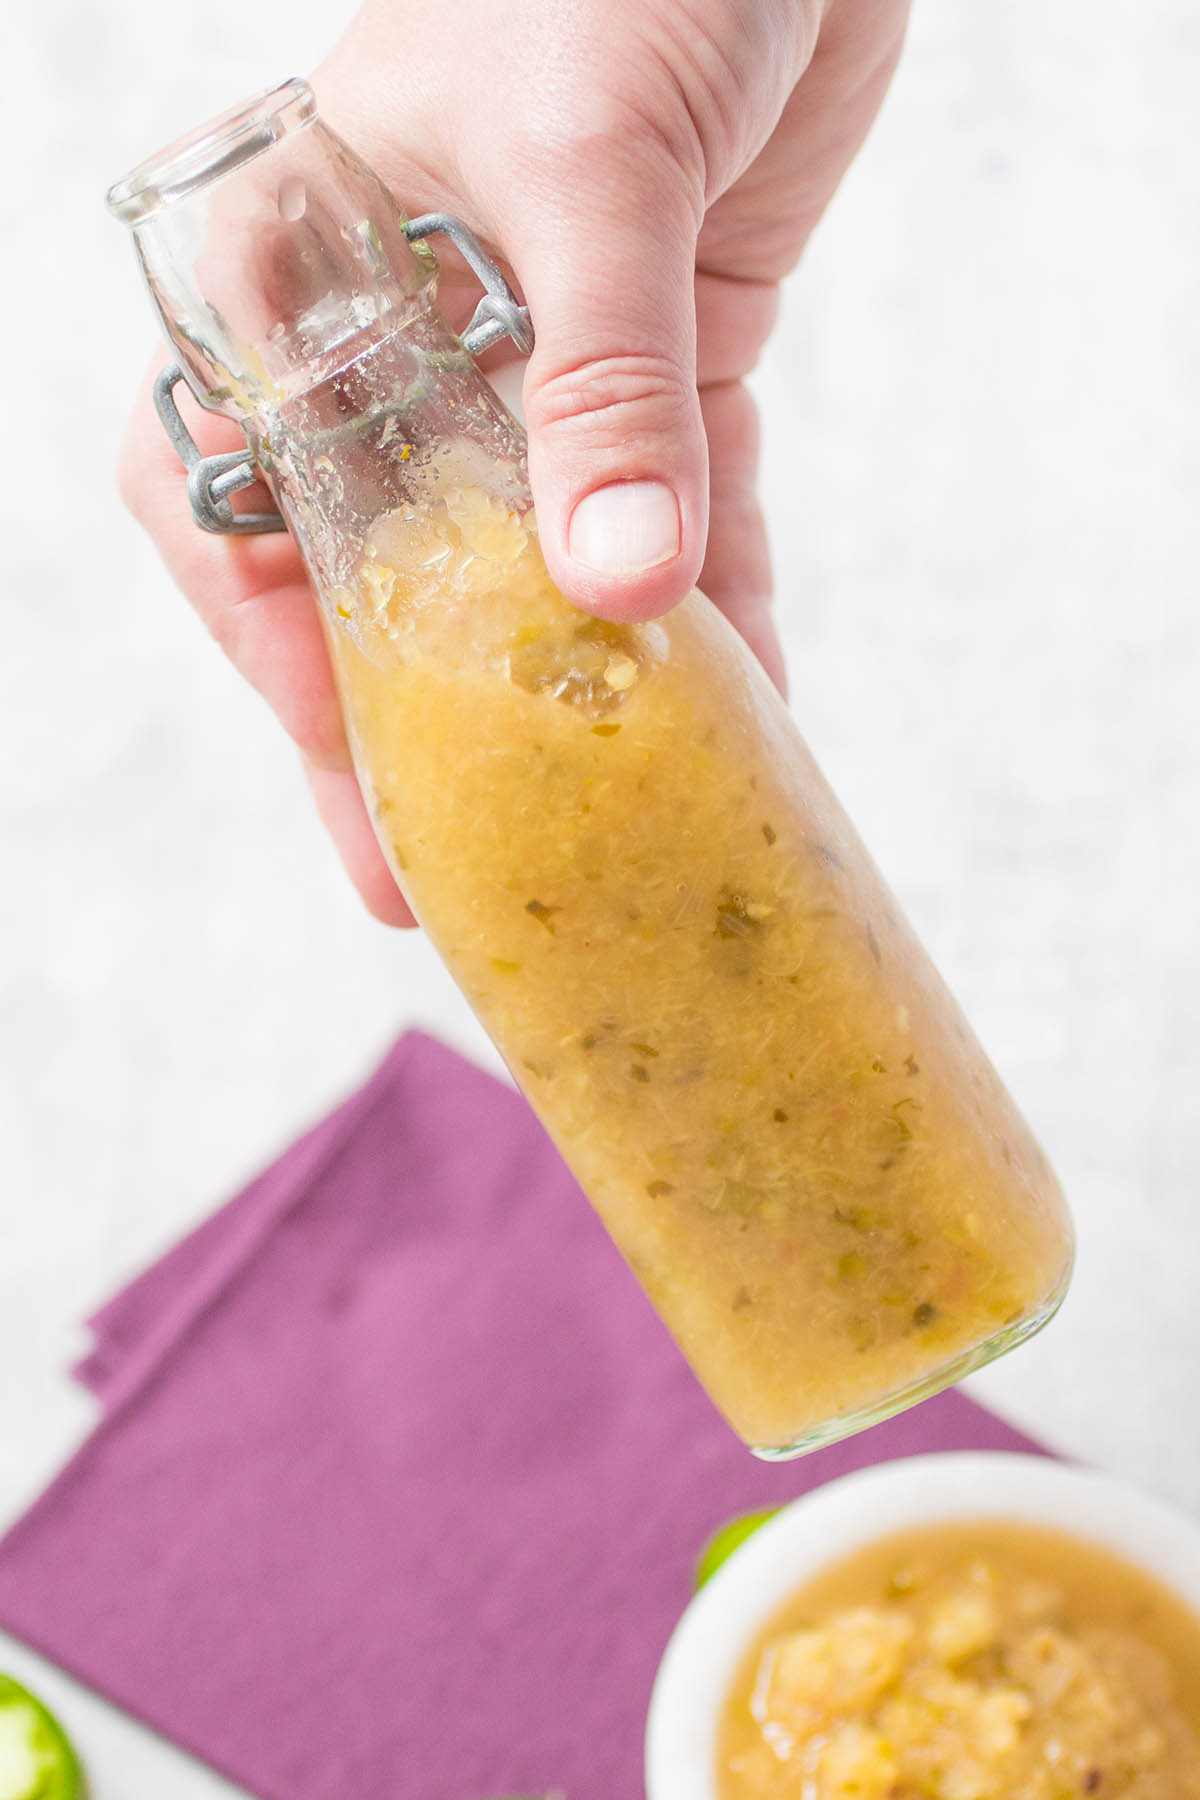 Holding a jar of the Pineapple-Jalapeno Hot Sauce